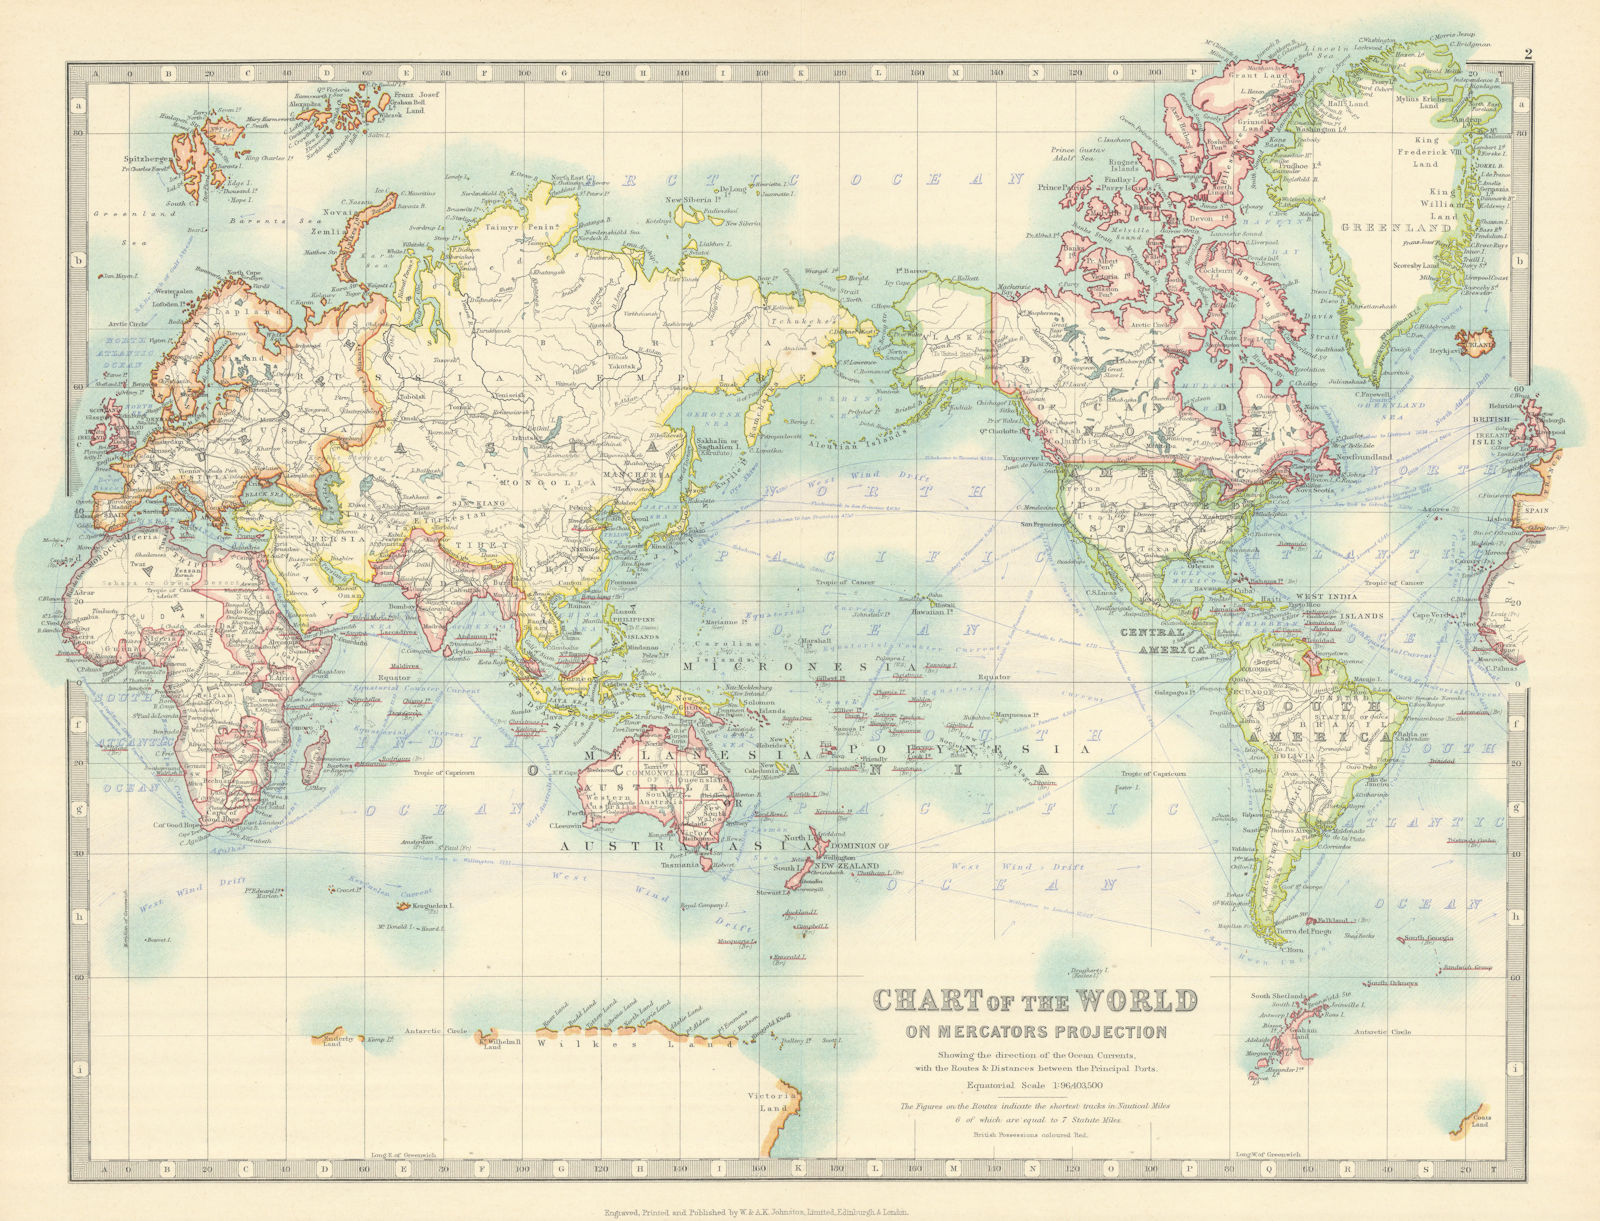 WORLD ON MERCATOR'S PROJECTION unusually Pacific-centred. JOHNSTON 1913 map